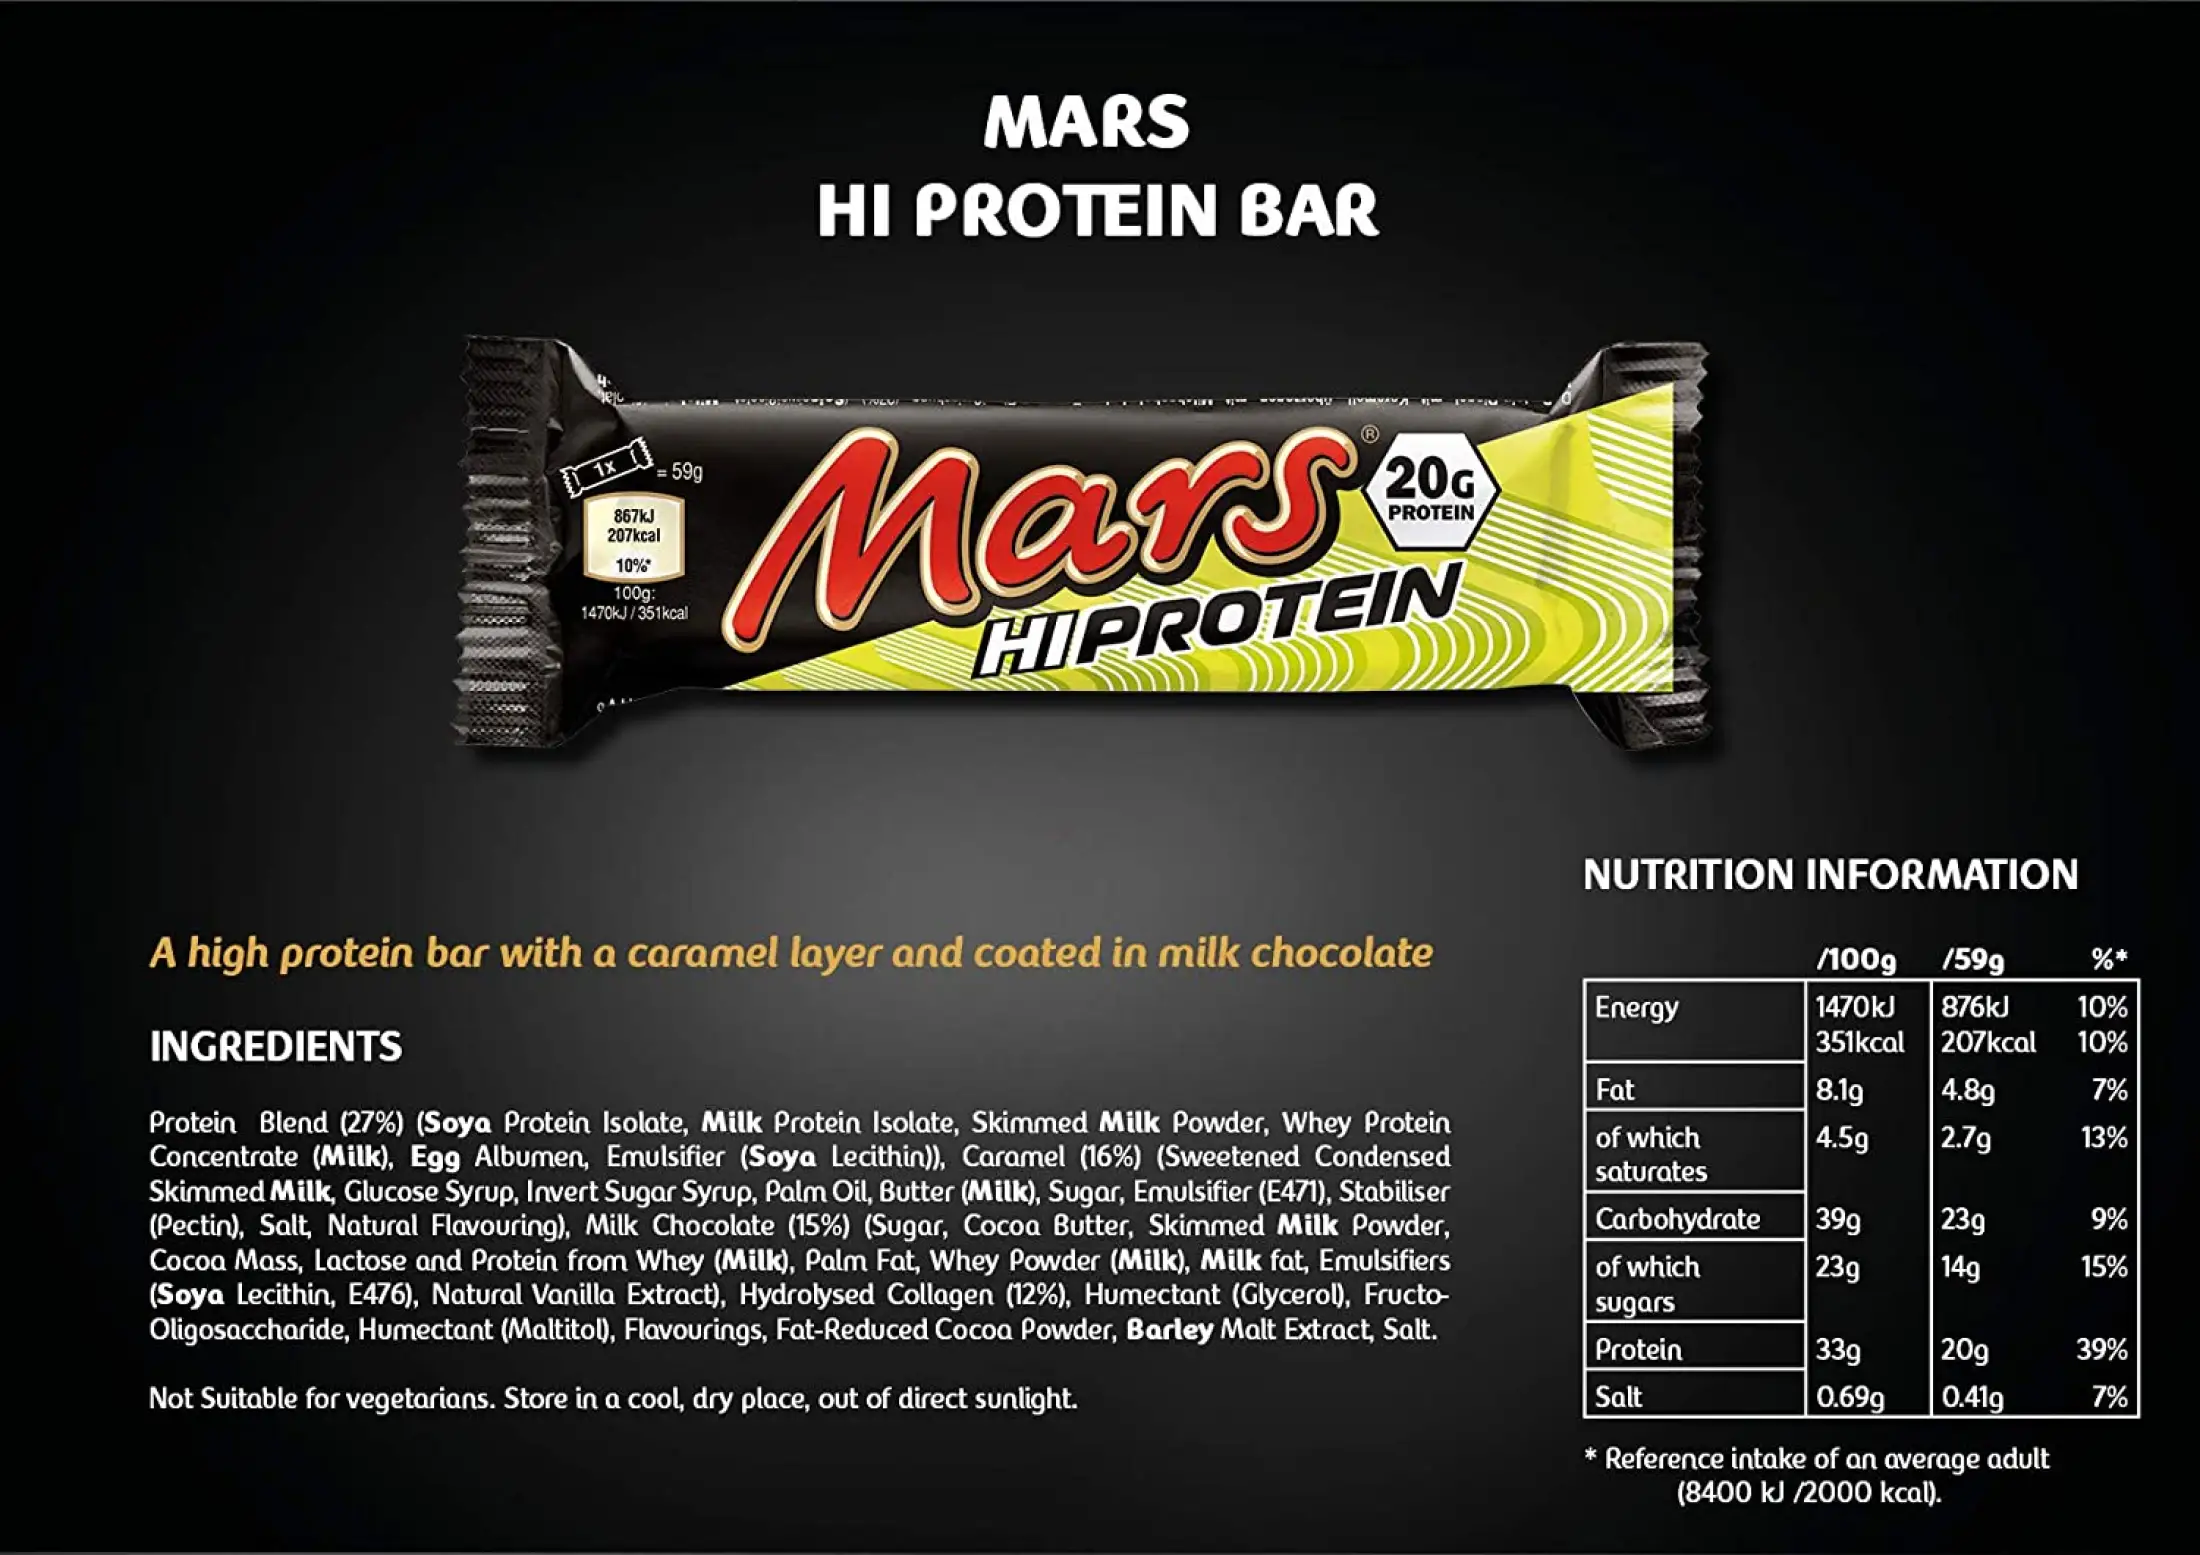 Mars High Protein Bar (12 bars x59g) - High Protein Energy Snack with Caramel, Nougat and Real Milk Chocolate - Contains 20g Protein, Low Sugar, for Muscle Gain, Weight Loss | Lazada PH